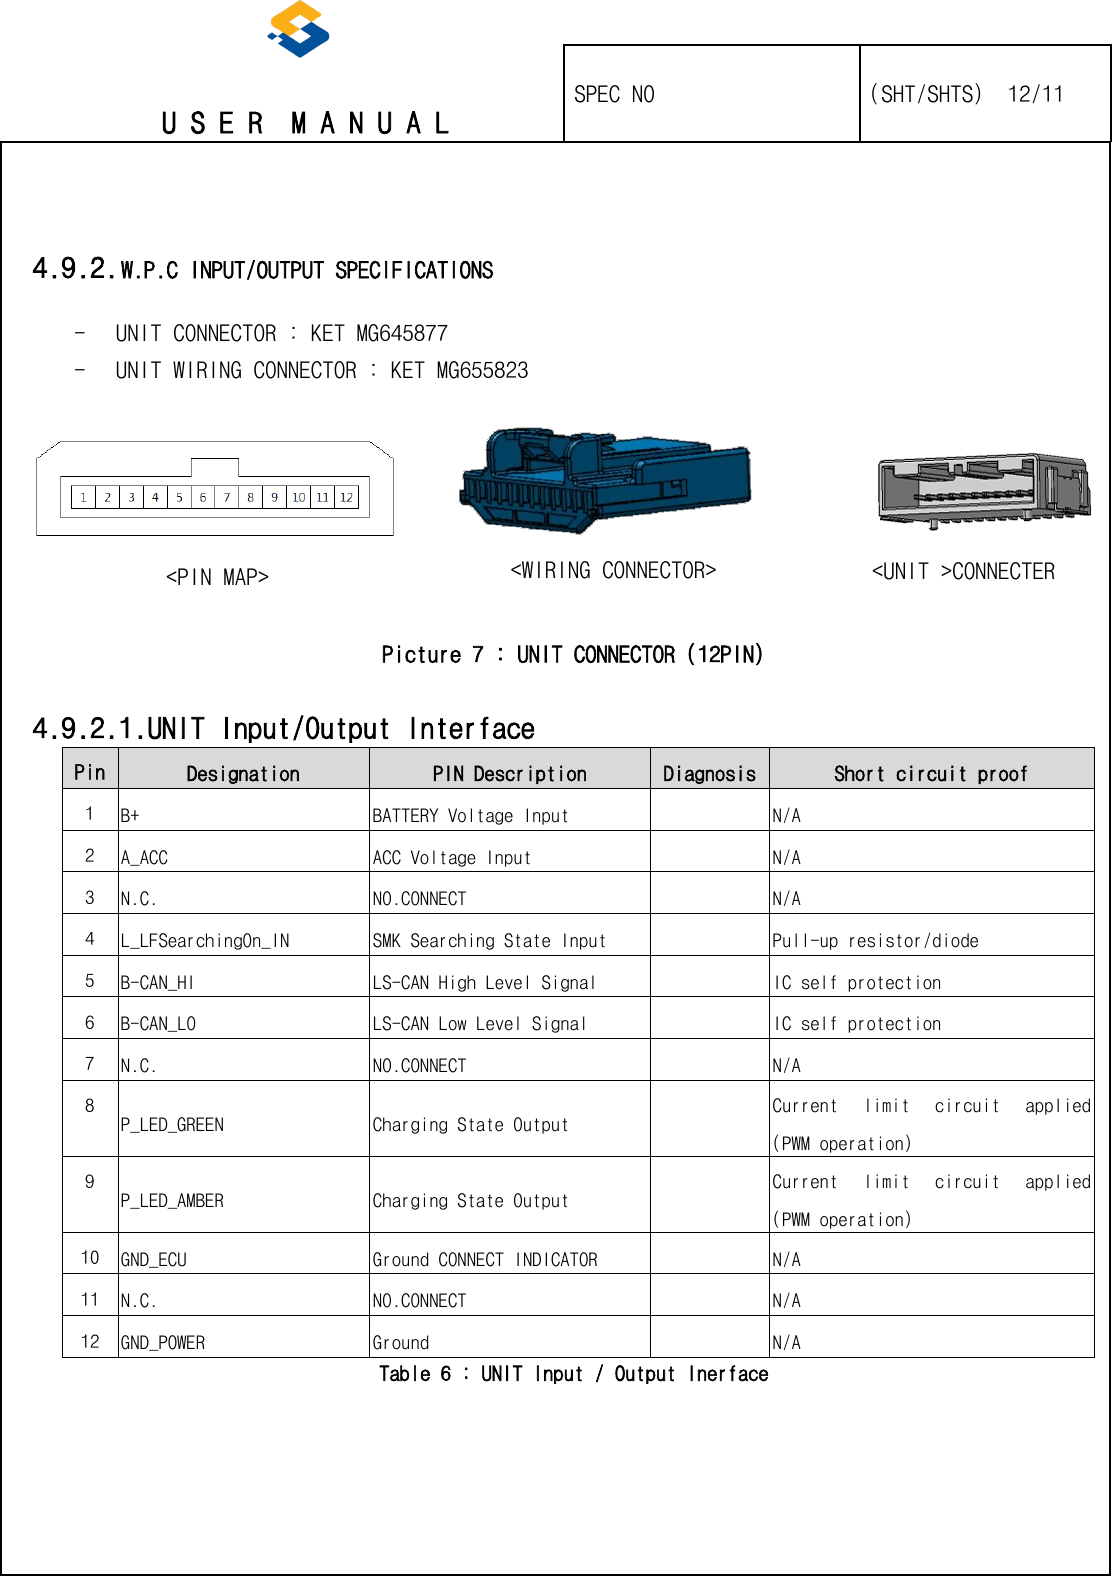   U S E R  M A N U A L    SPEC NO   (SHT/SHTS)  12/11                                                                                                                                                  4.9.2. W.P.C INPUT/OUTPUT SPECIFICATIONS  - UNIT CONNECTOR : KET MG645877 - UNIT WIRING CONNECTOR : KET MG655823                 Picture 7 : UNIT CONNECTOR (12PIN)  4.9.2.1.UNIT Input/Output Interface Pin Designation PIN Description Diagnosis Short circuit proof 1 B+ BATTERY Voltage Input  N/A 2 A_ACC ACC Voltage Input  N/A 3 N.C. NO.CONNECT  N/A 4 L_LFSearchingOn_IN SMK Searching State Input  Pull-up resistor/diode 5 B-CAN_HI LS-CAN High Level Signal  IC self protection 6 B-CAN_LO LS-CAN Low Level Signal  IC self protection 7 N.C. NO.CONNECT  N/A 8 P_LED_GREEN Charging State Output  Current  limit  circuit  applied (PWM operation) 9 P_LED_AMBER Charging State Output  Current  limit  circuit  applied (PWM operation) 10 GND_ECU Ground CONNECT INDICATOR  N/A 11 N.C. NO.CONNECT  N/A 12 GND_POWER Ground  N/A Table 6 : UNIT Input / Output Inerface &lt;UNIT &gt;CONNECTER &lt;WIRING CONNECTOR&gt; &lt;PIN MAP&gt; 